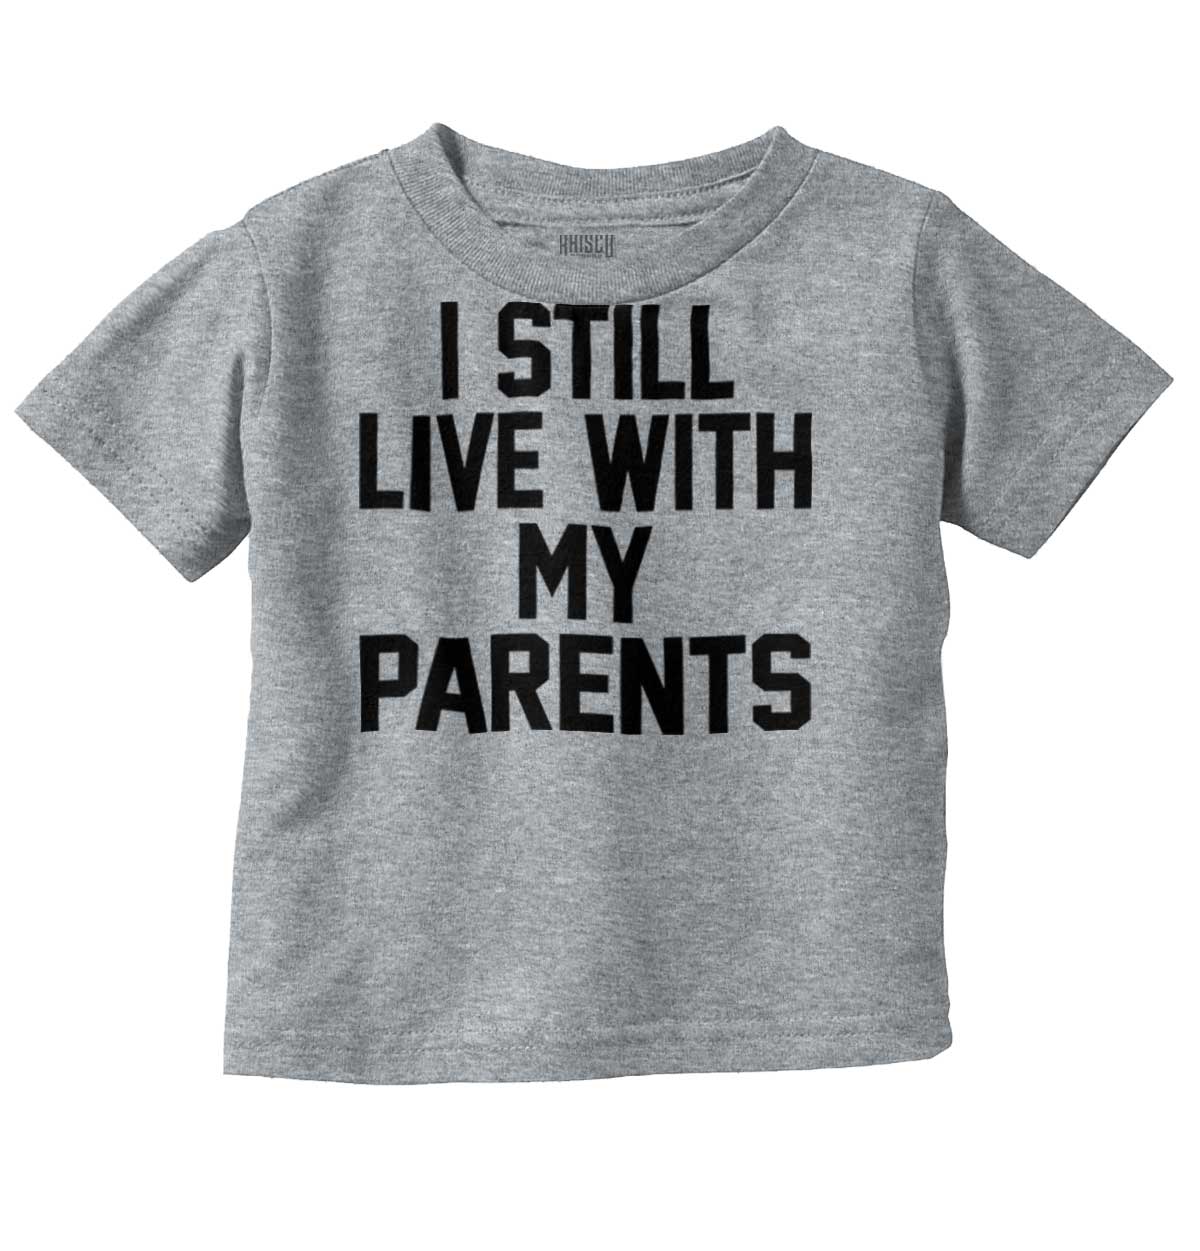 Live With My Parents Infant Toddler T-Shirt | Brisco Baby